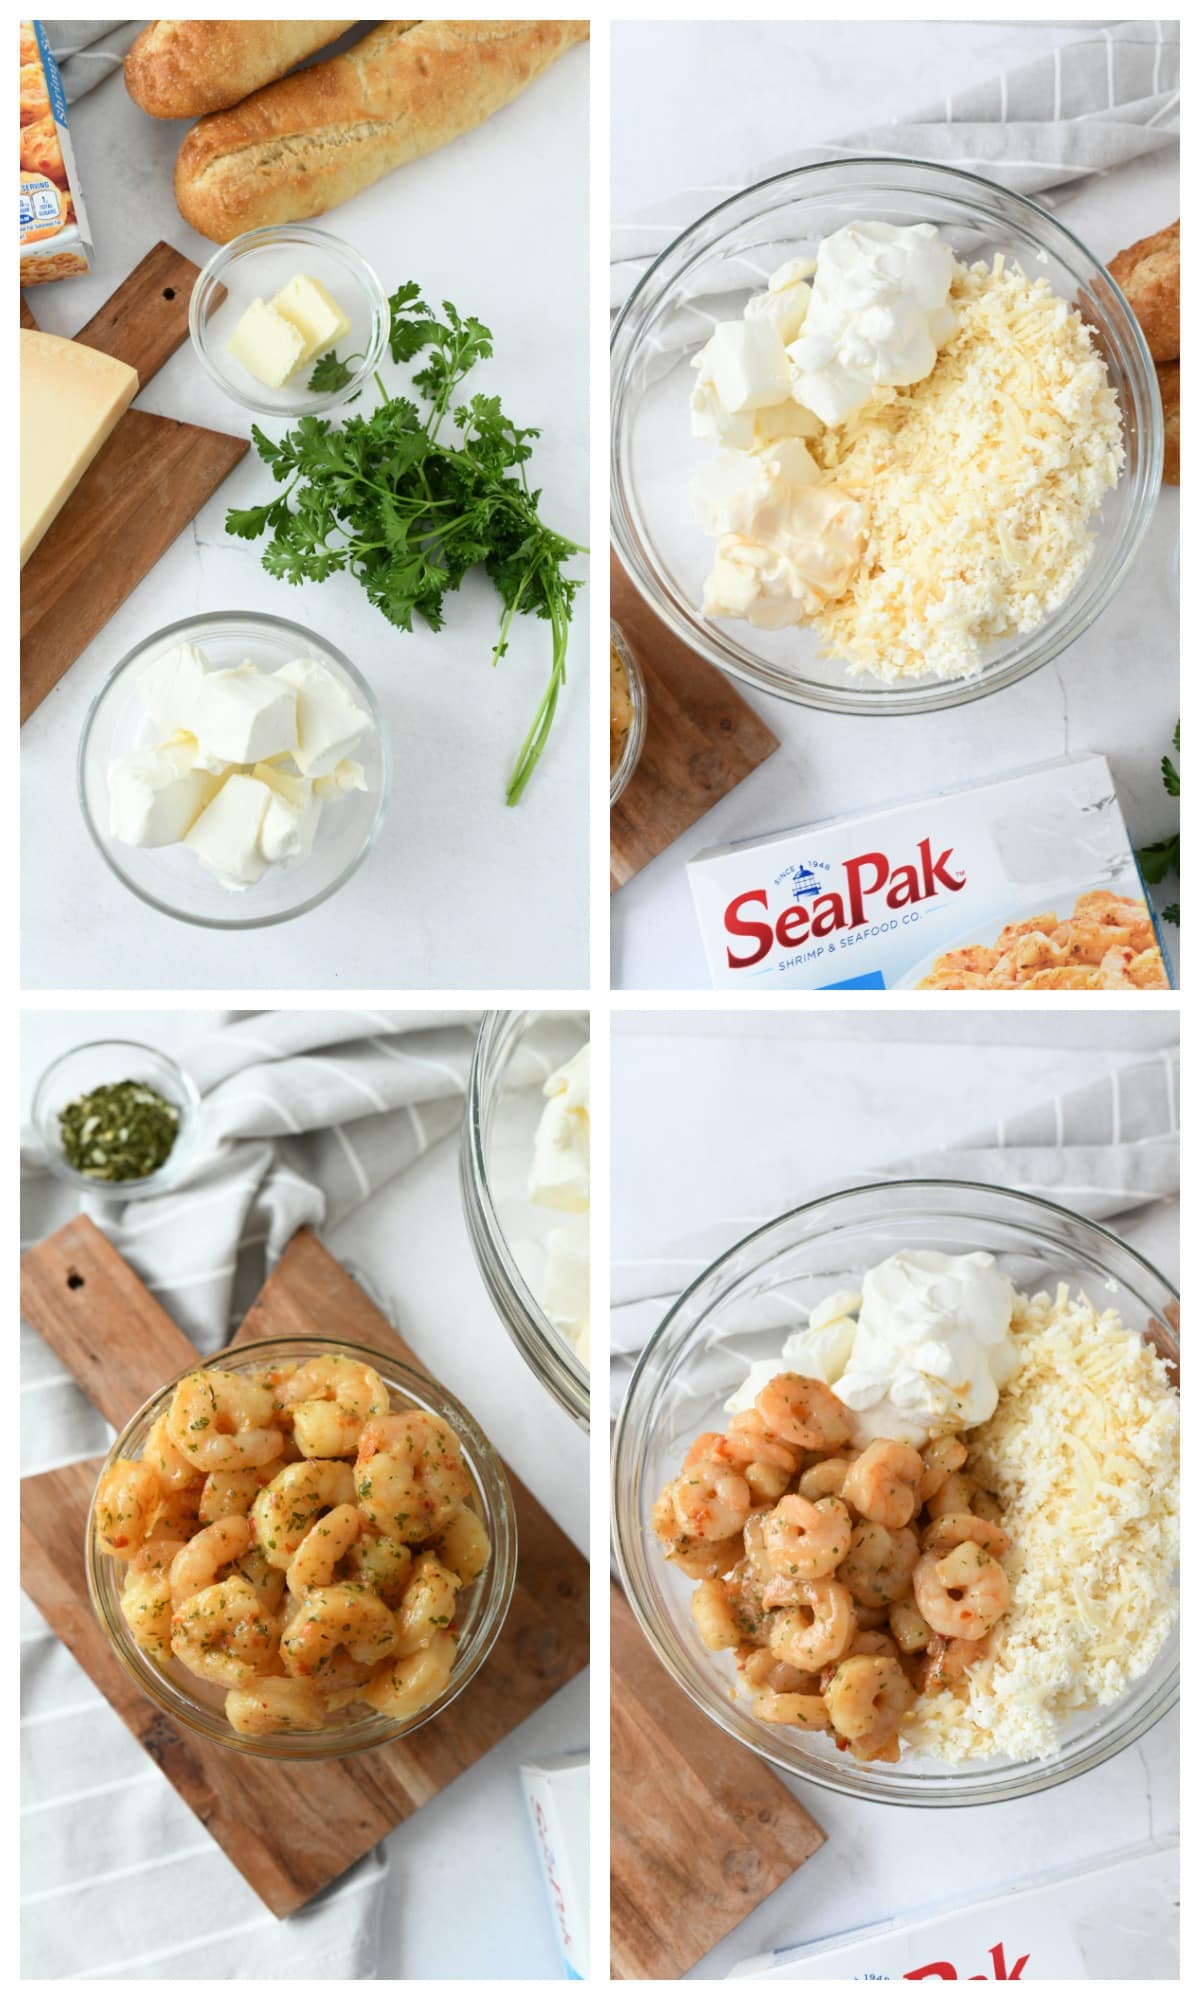 Shrimp scampi process collage showcasing the ingredients.